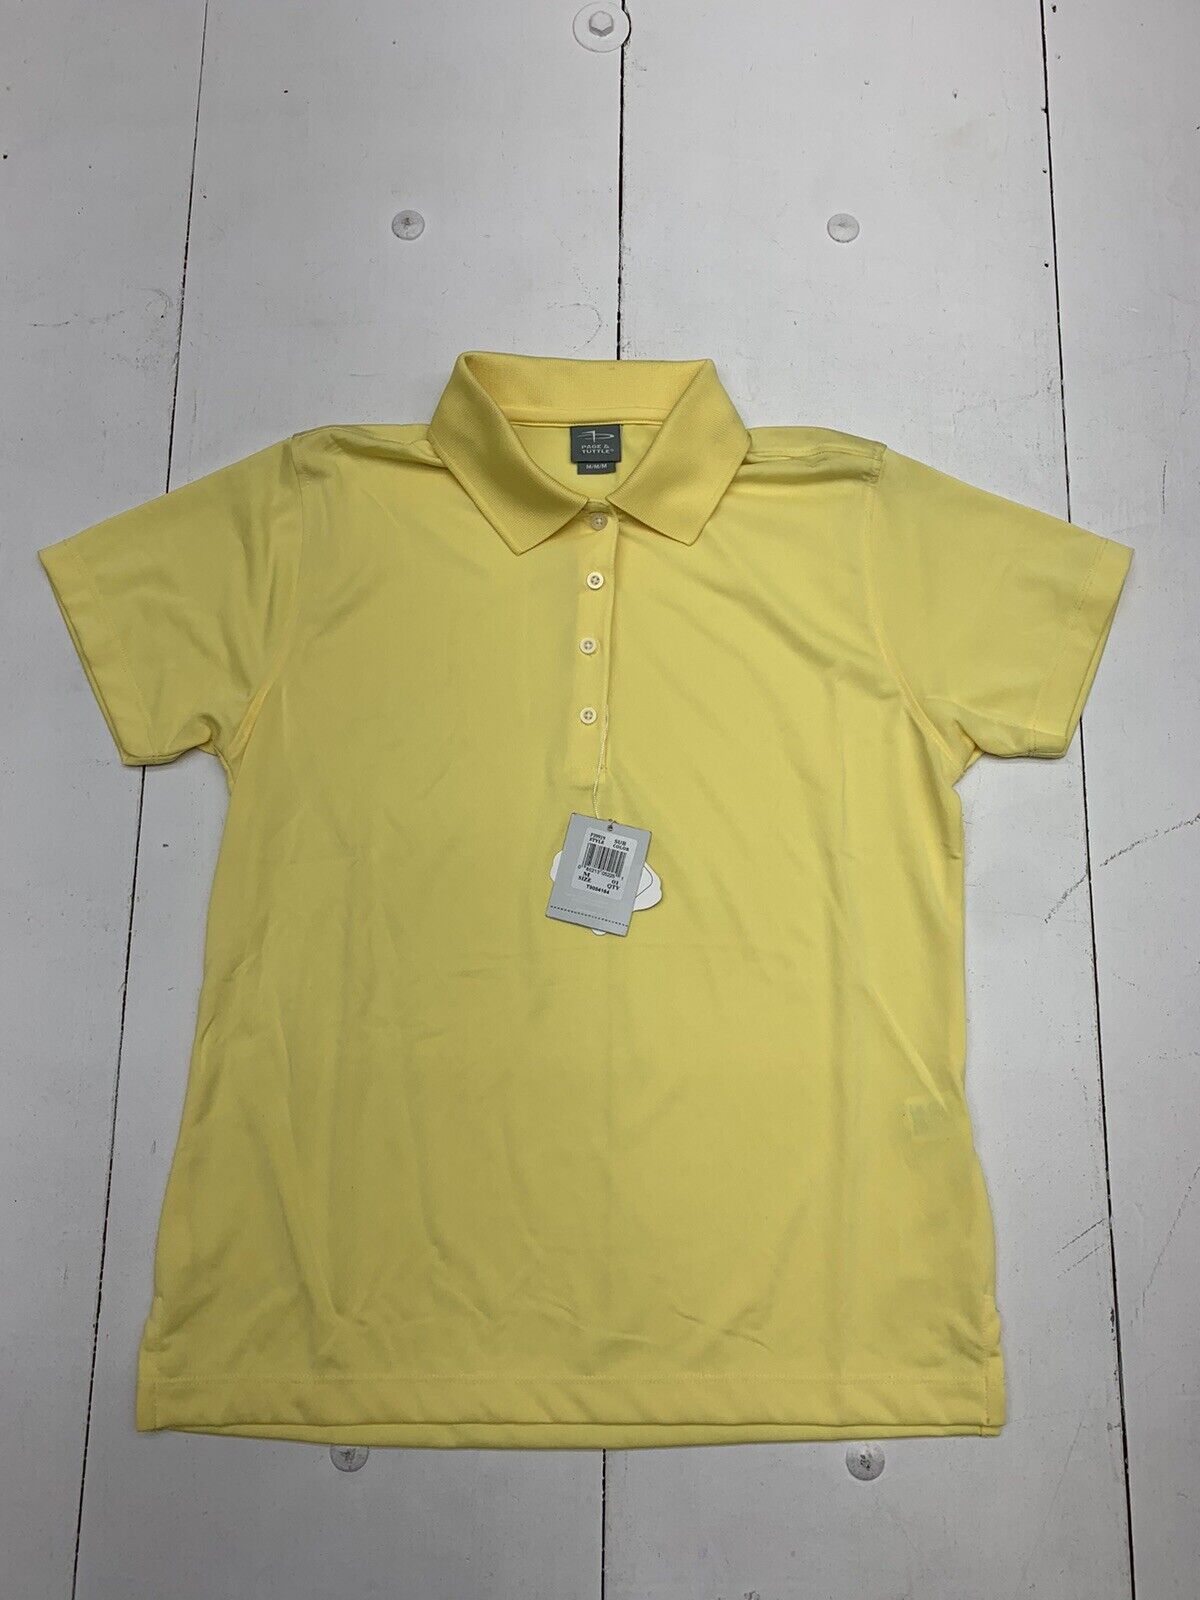 Page & Tuttle Womens Yellow Polo Shirt Size Medium